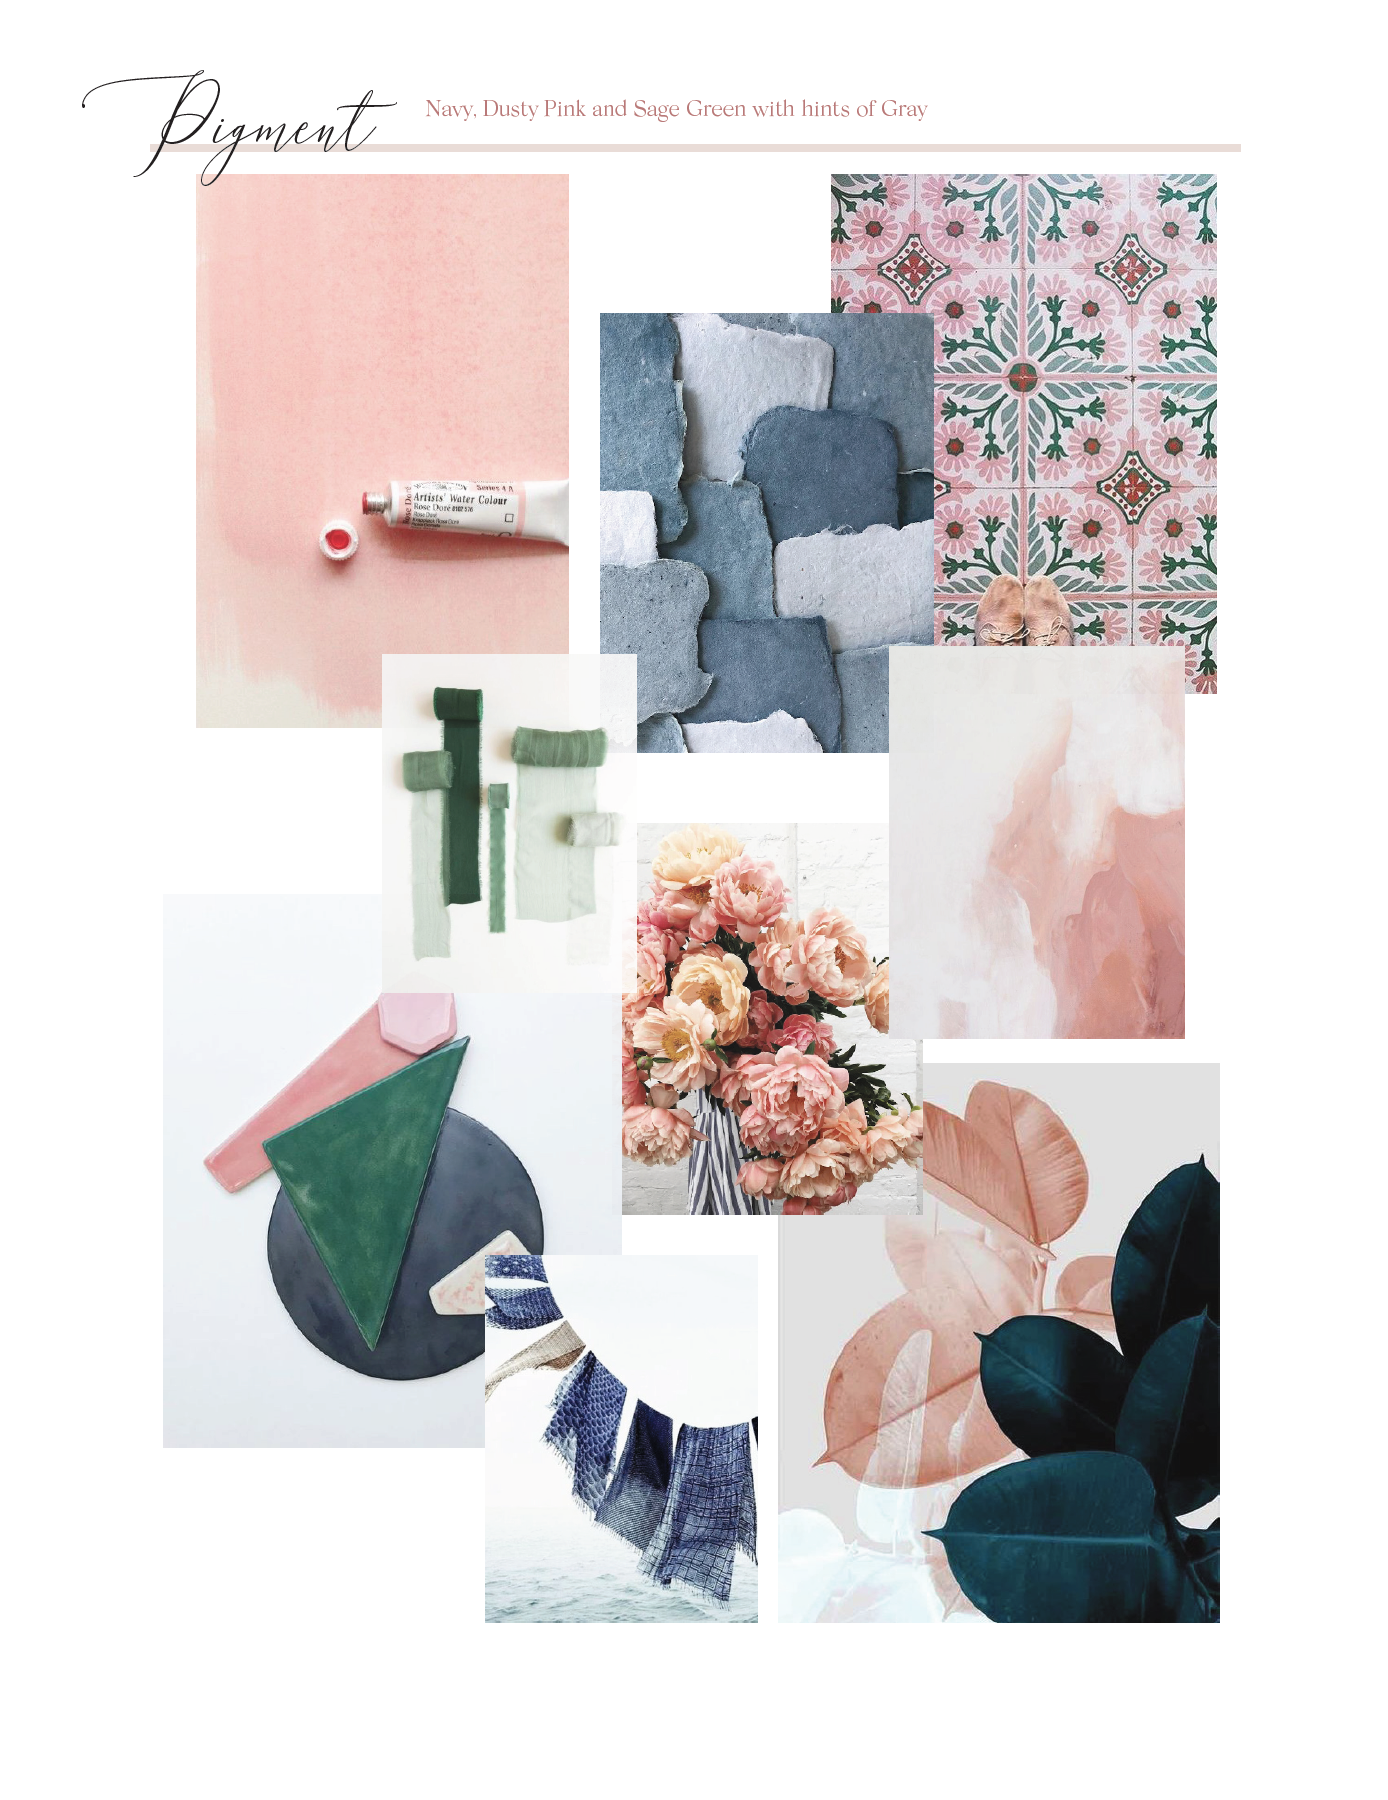 Charleston garden wedding color palette inspiration with navy, dusty pink, sage green and gray 